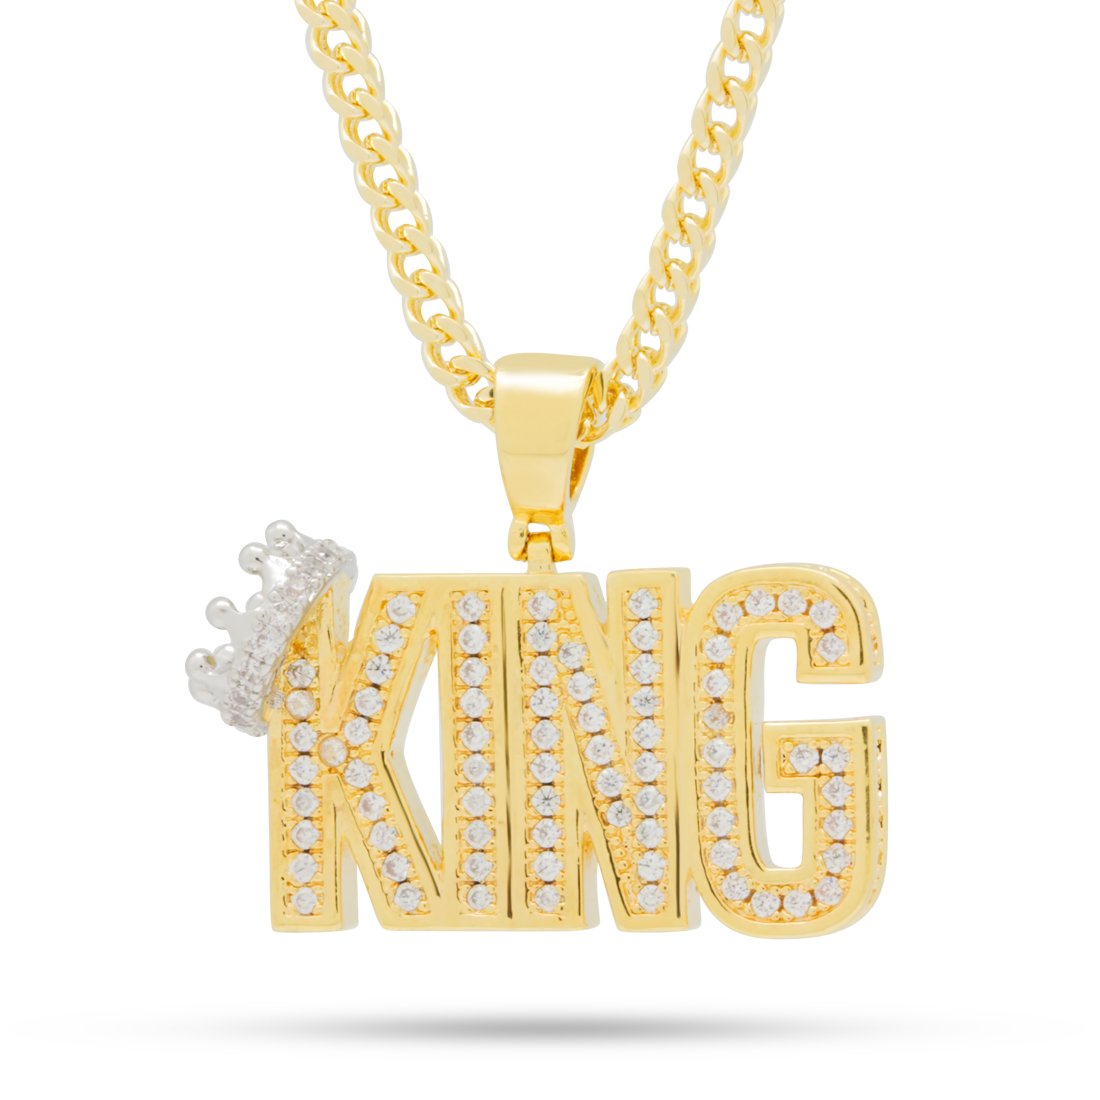 Drakesboutique - King Ice 14k Gold Plated The Crowned King 